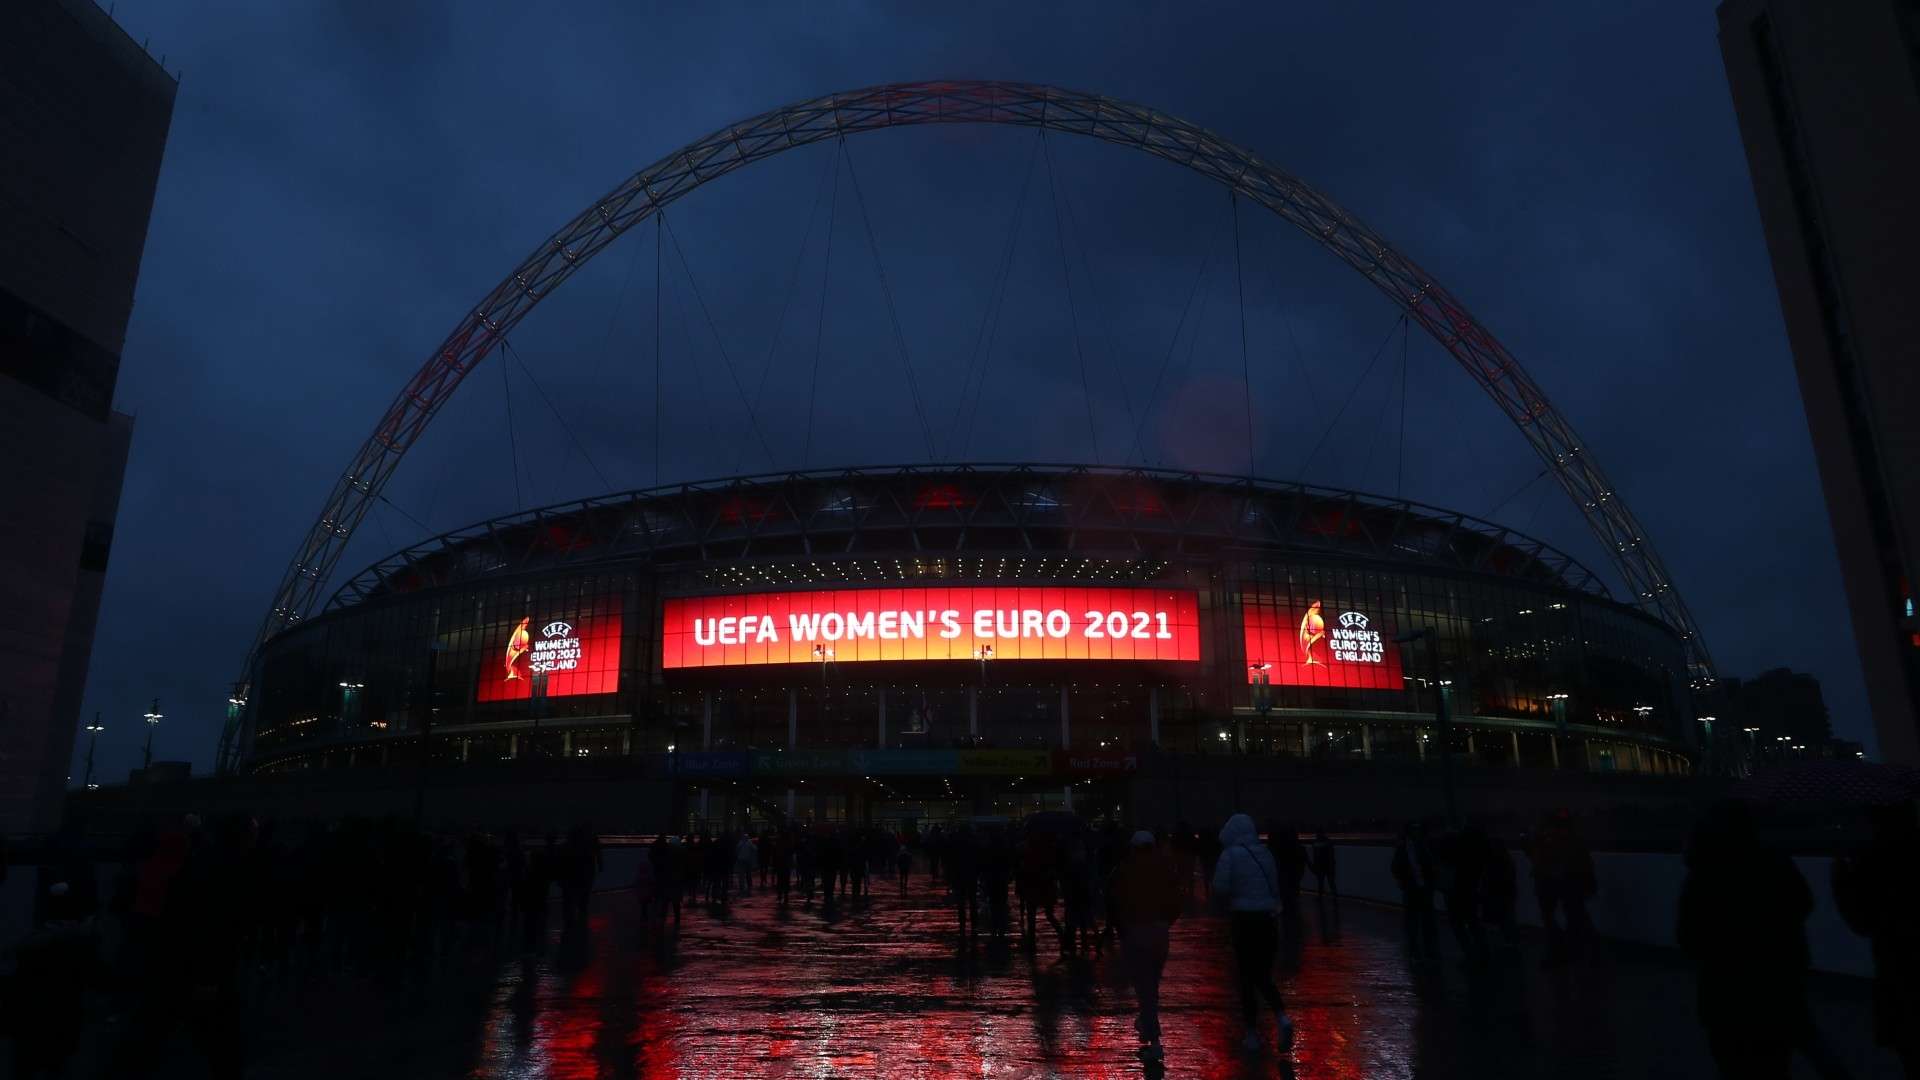 Fans make their way to the Wembley stadium